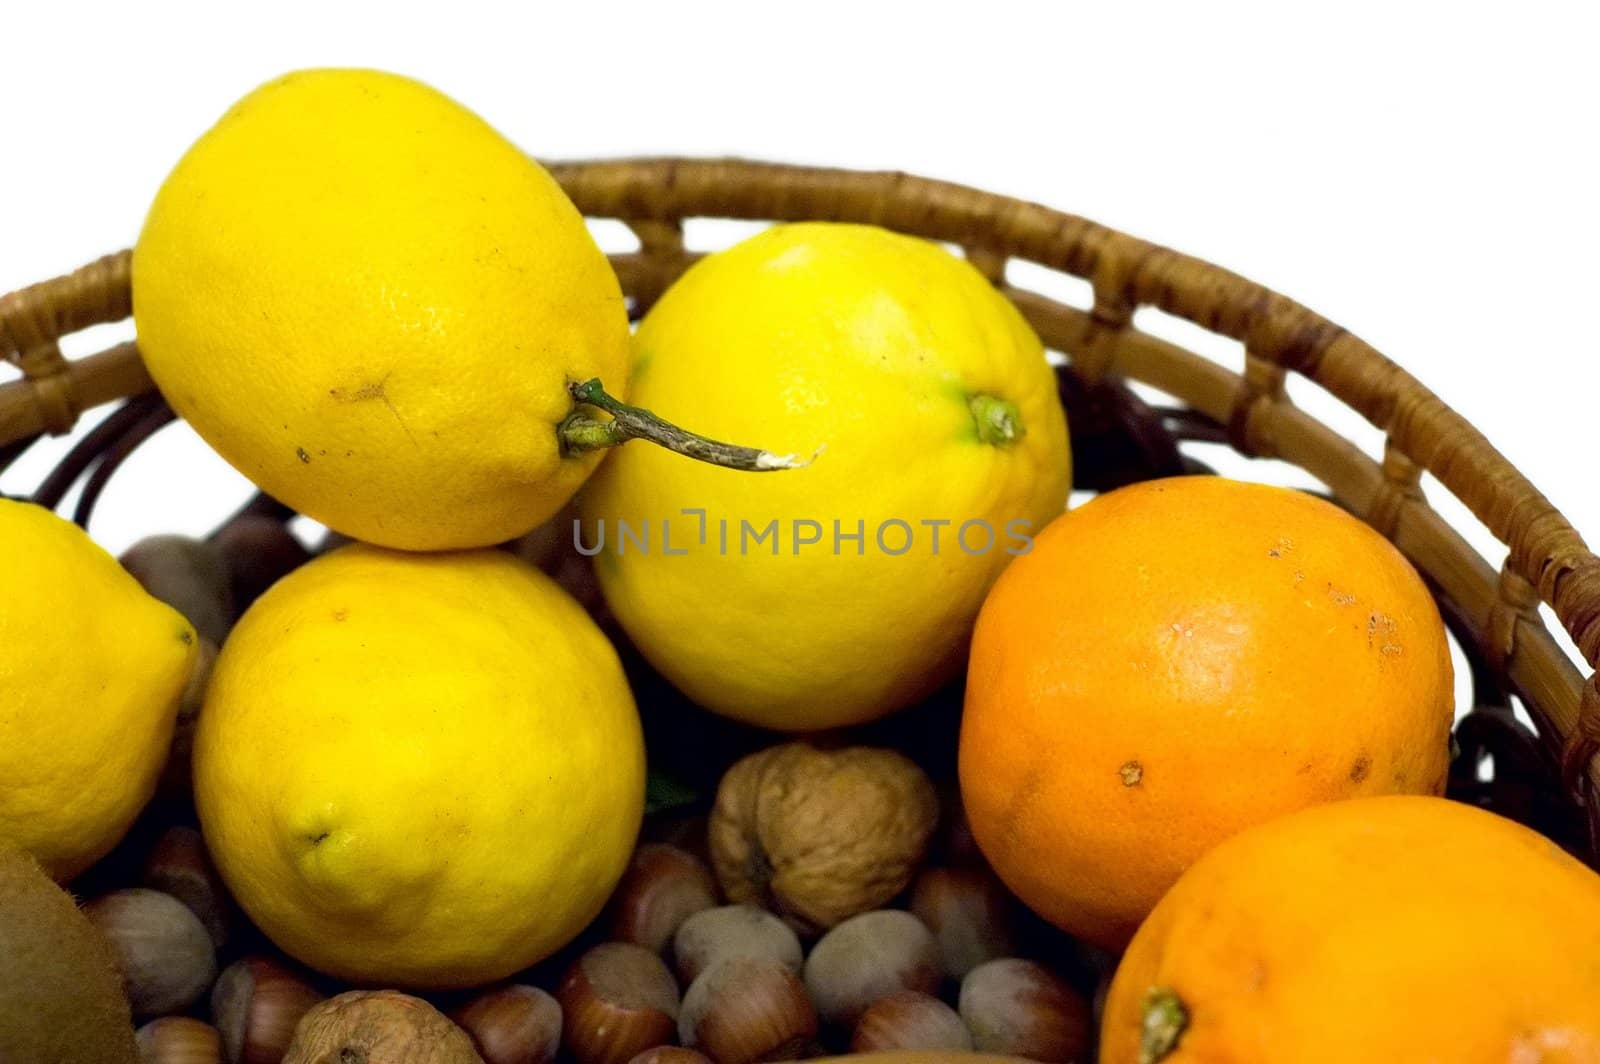 Lemons, oranges and nuts by sil